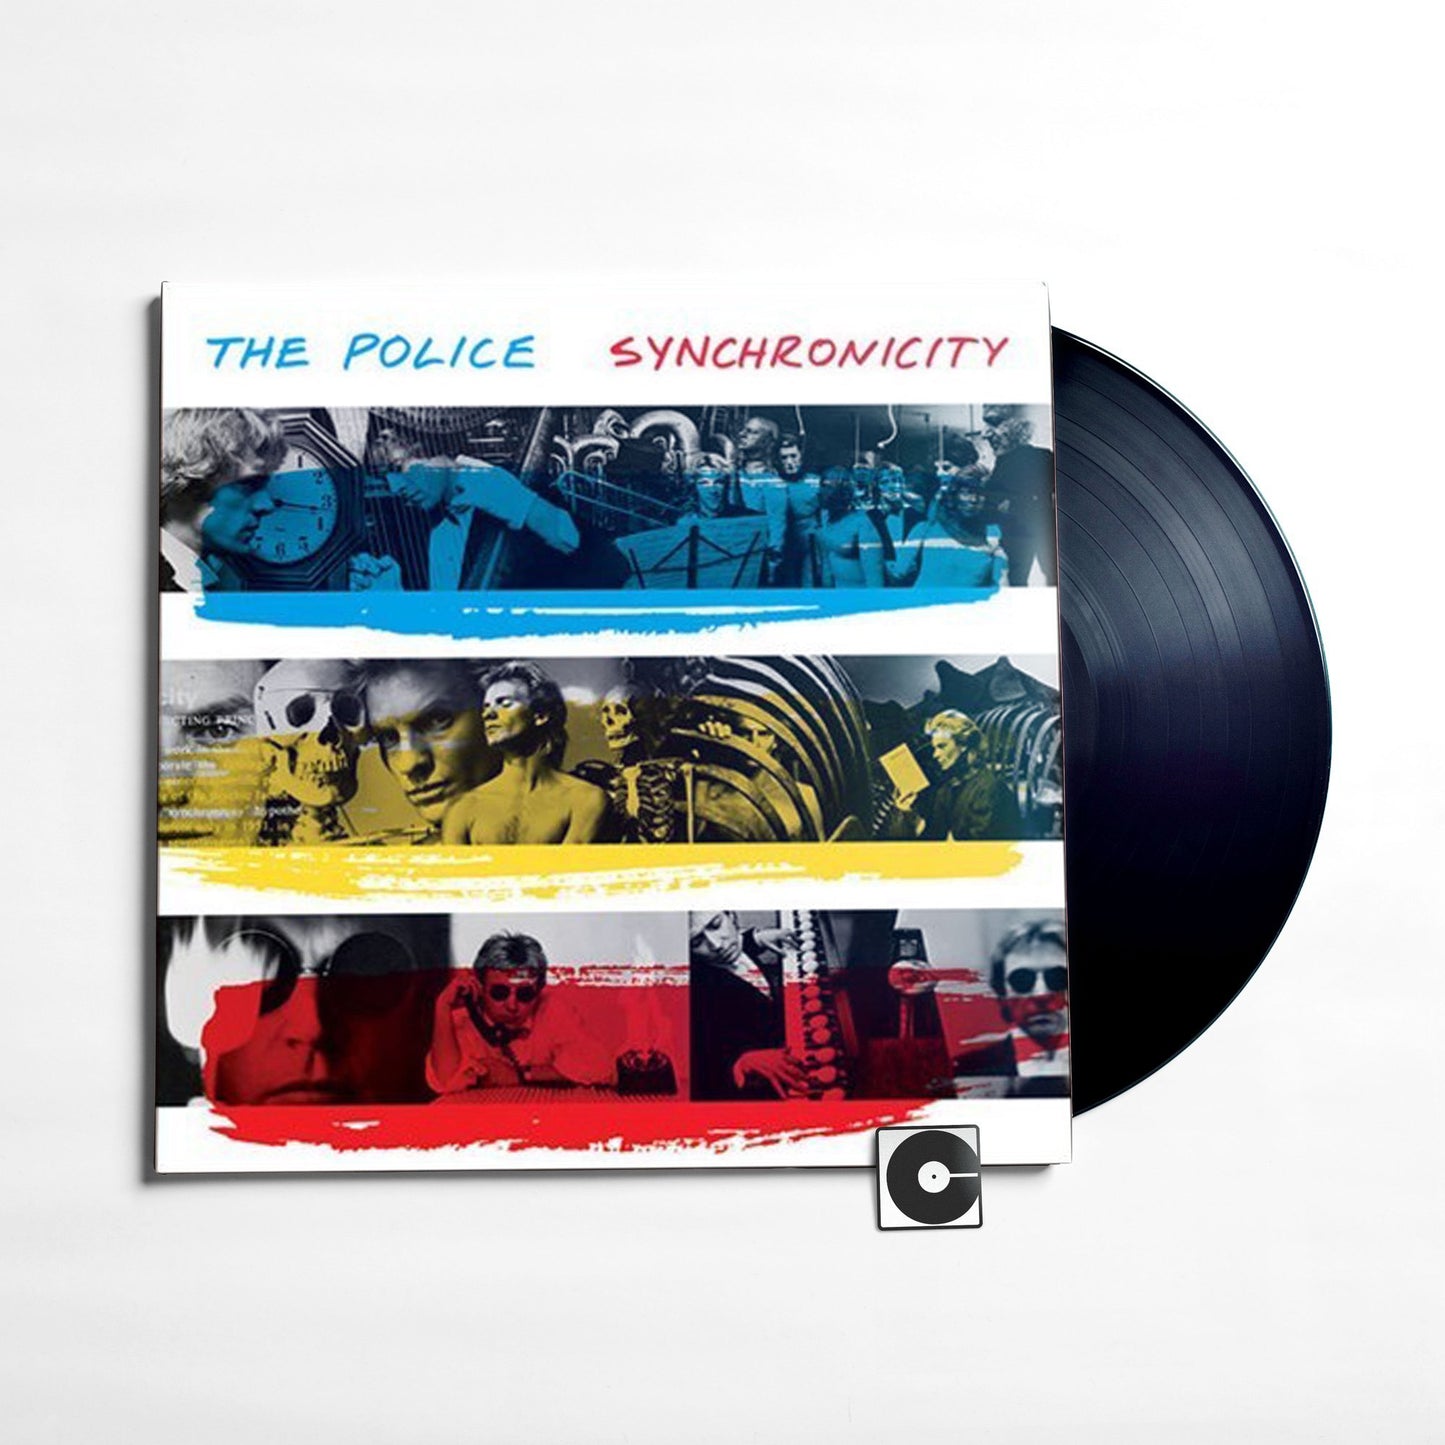 The Police - "Synchronicity"